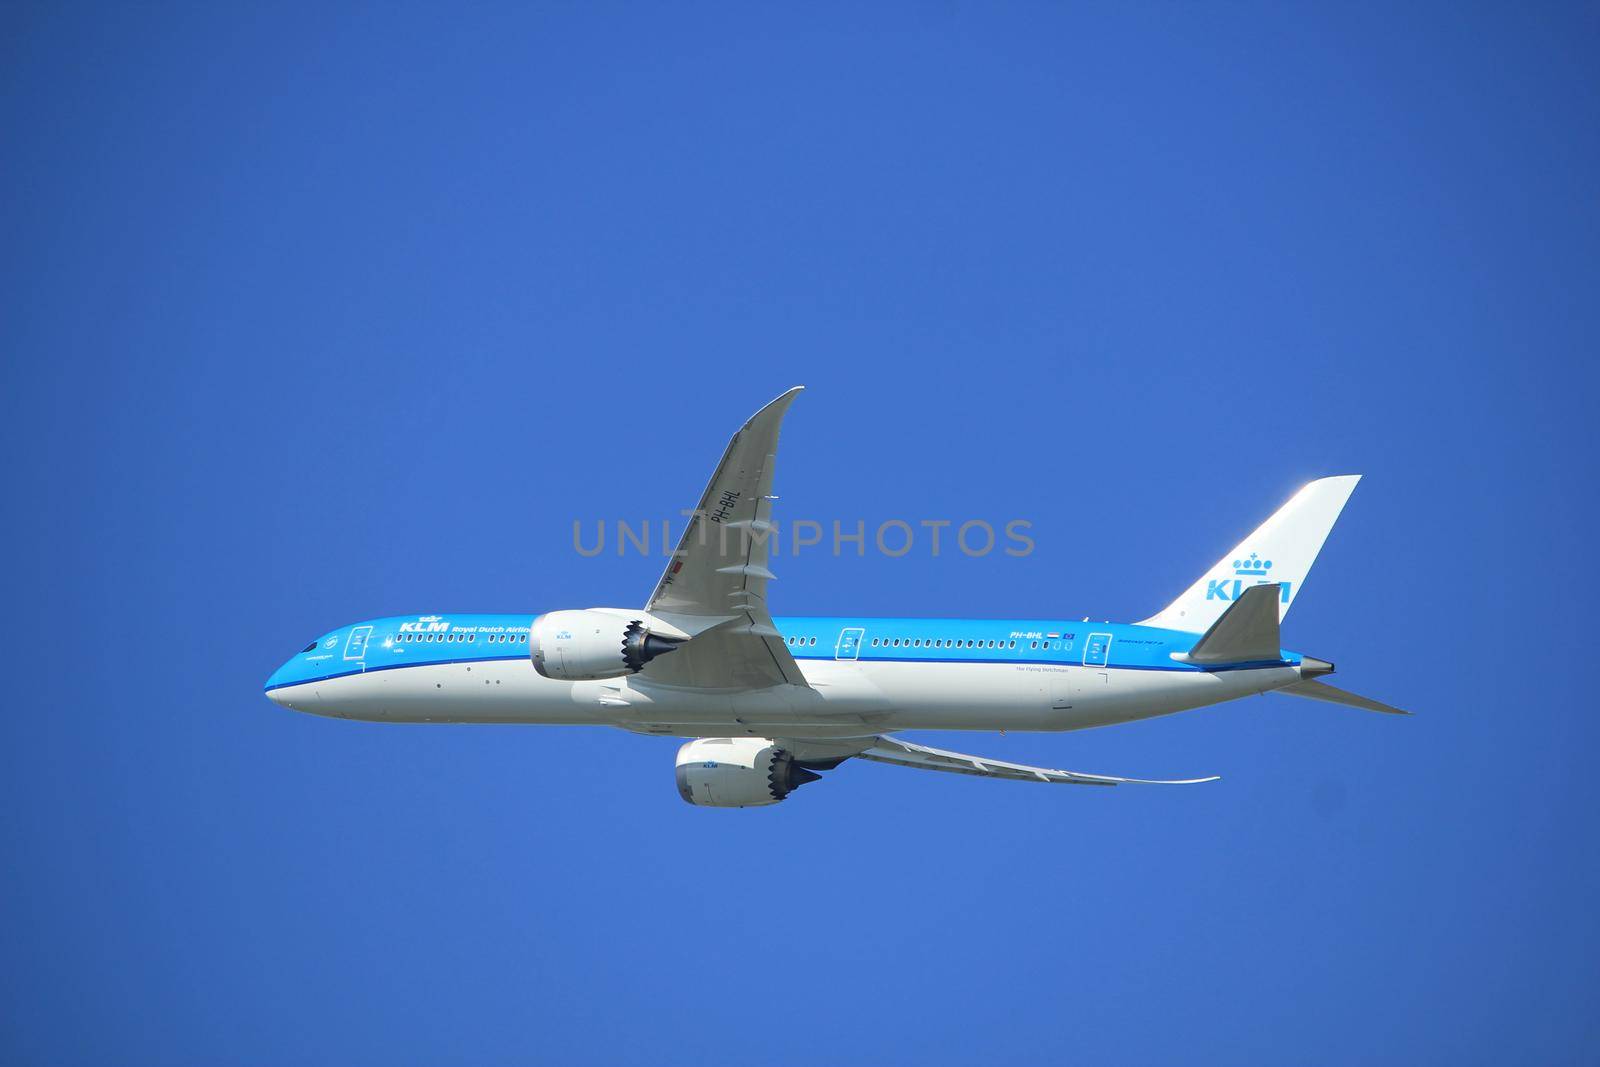 Amsterdam the Netherlands - September 23rd 2017: PH-BHL KLM Royal Dutch Airlines Boeing 787-9 Dreamliner takeoff from Kaagbaan runway, Amsterdam Airport Schiphol